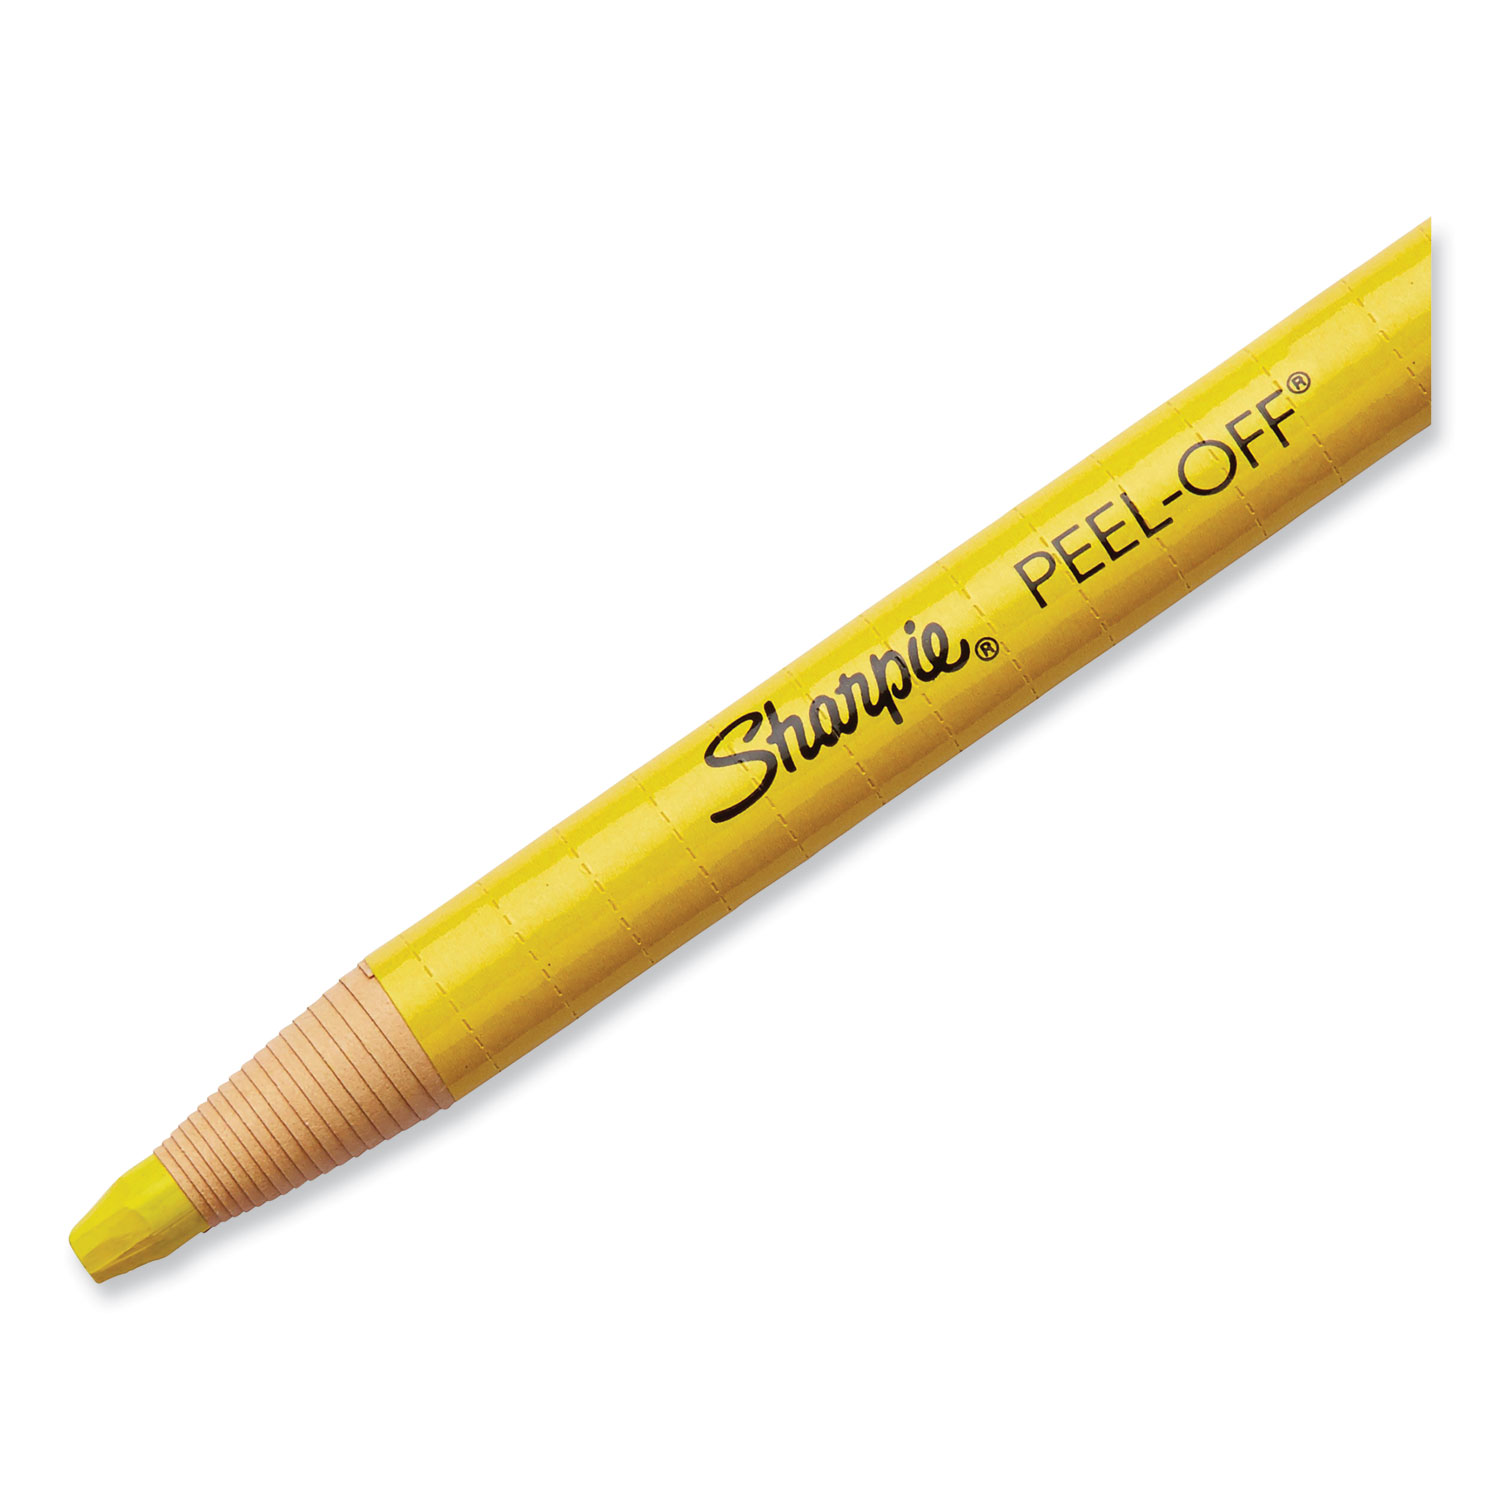 Peel-Off China Markers, Yellow, Dozen - Pointer Office Products